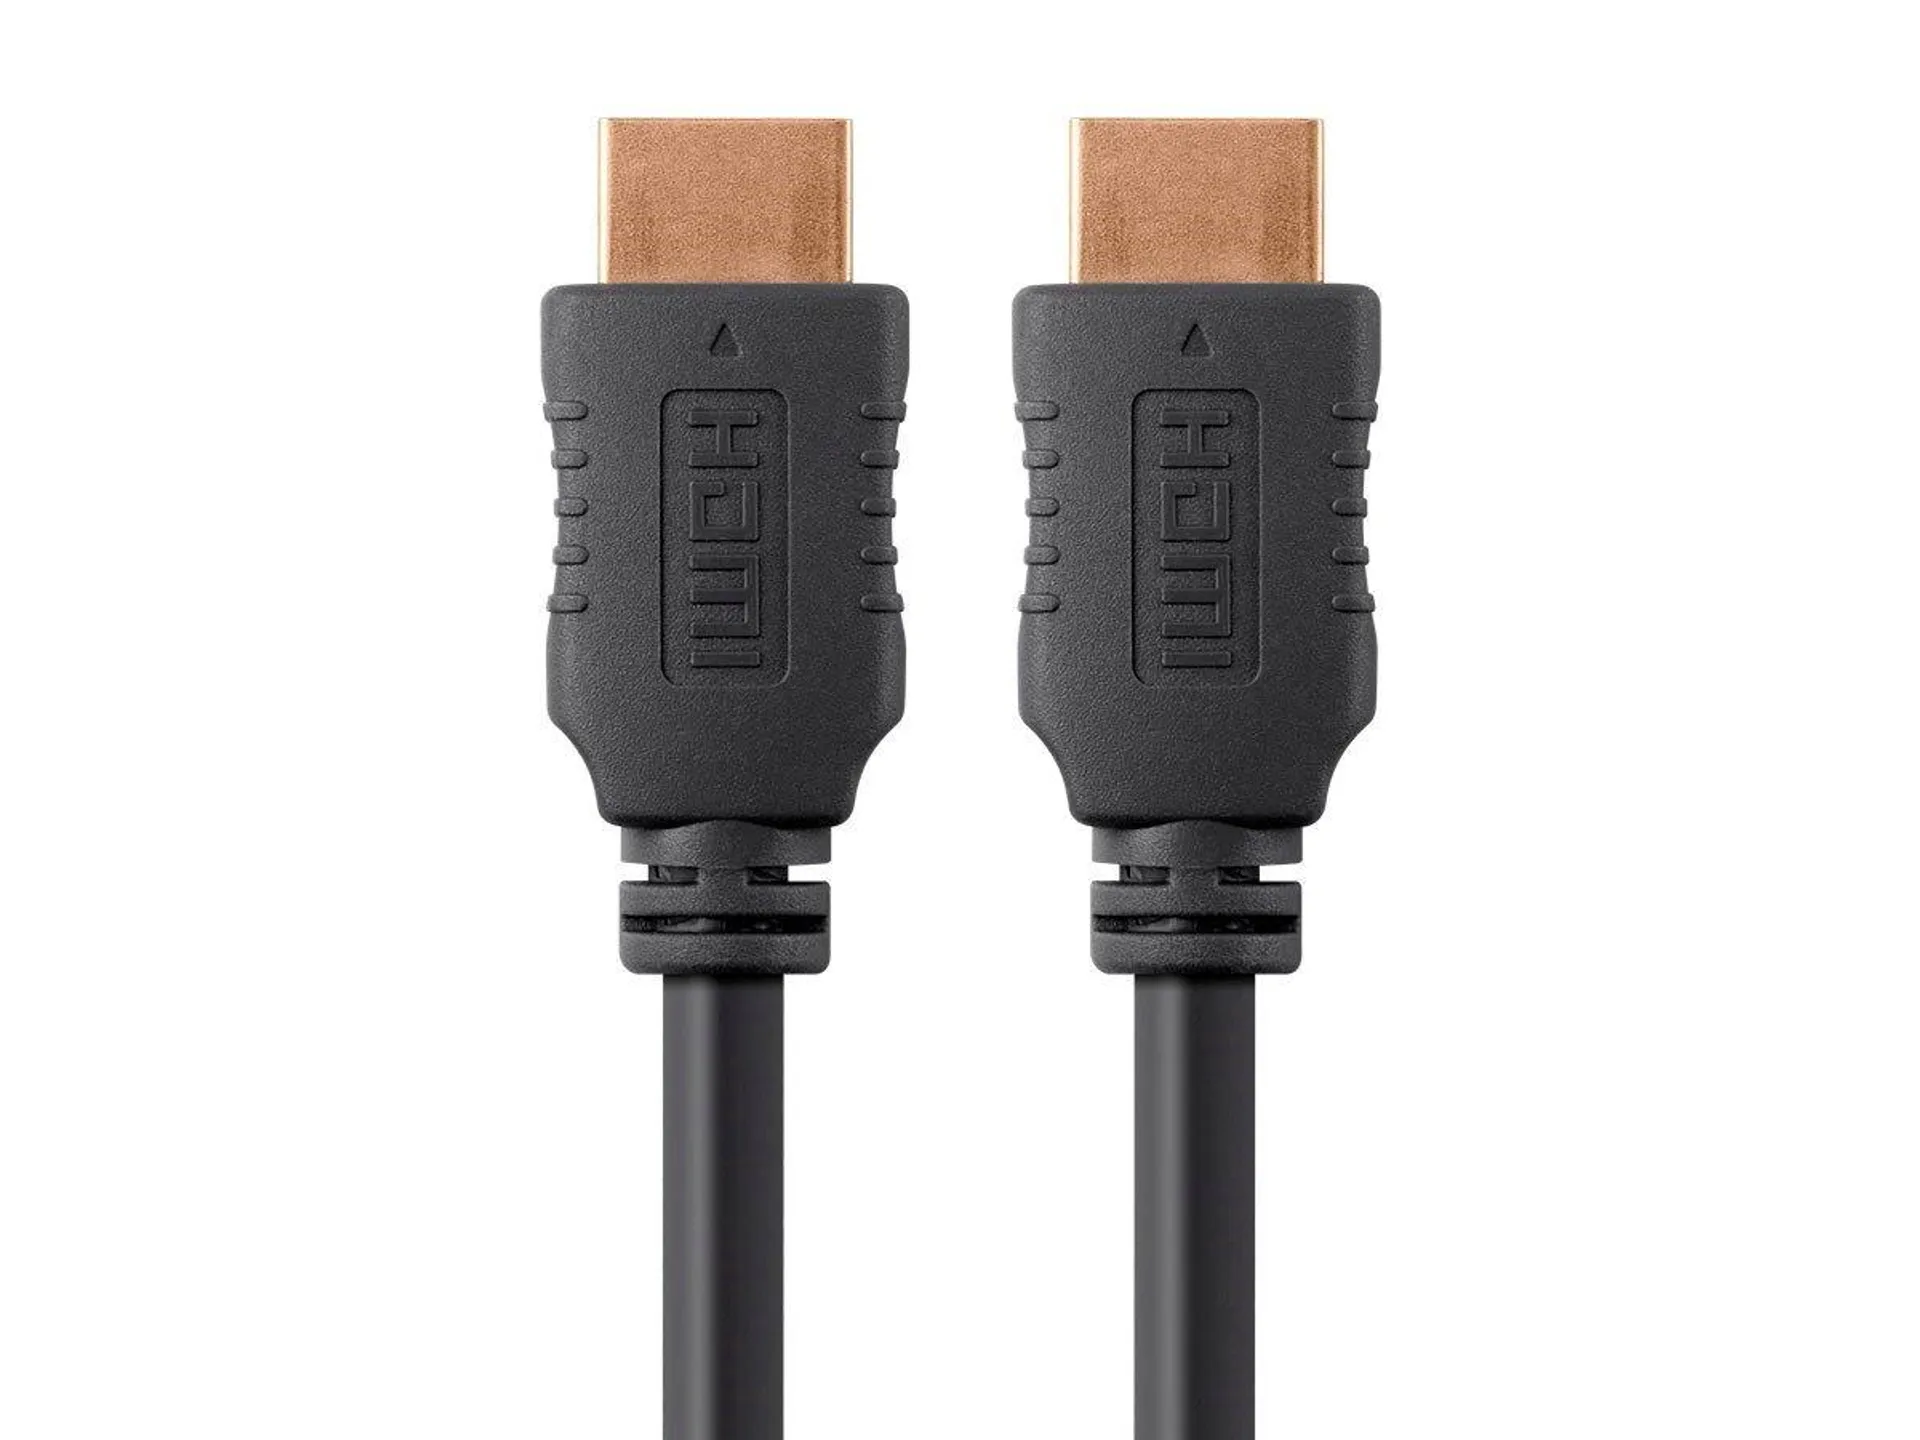 Monoprice 4K High Speed HDMI Cable - HDMI 2.0, 4K@60Hz, HDR, HDR10, Dolby Vision, 18Gbps, YUV 4:4:4, 28AWG, With Ferrite Cores, 20 Feet, Black